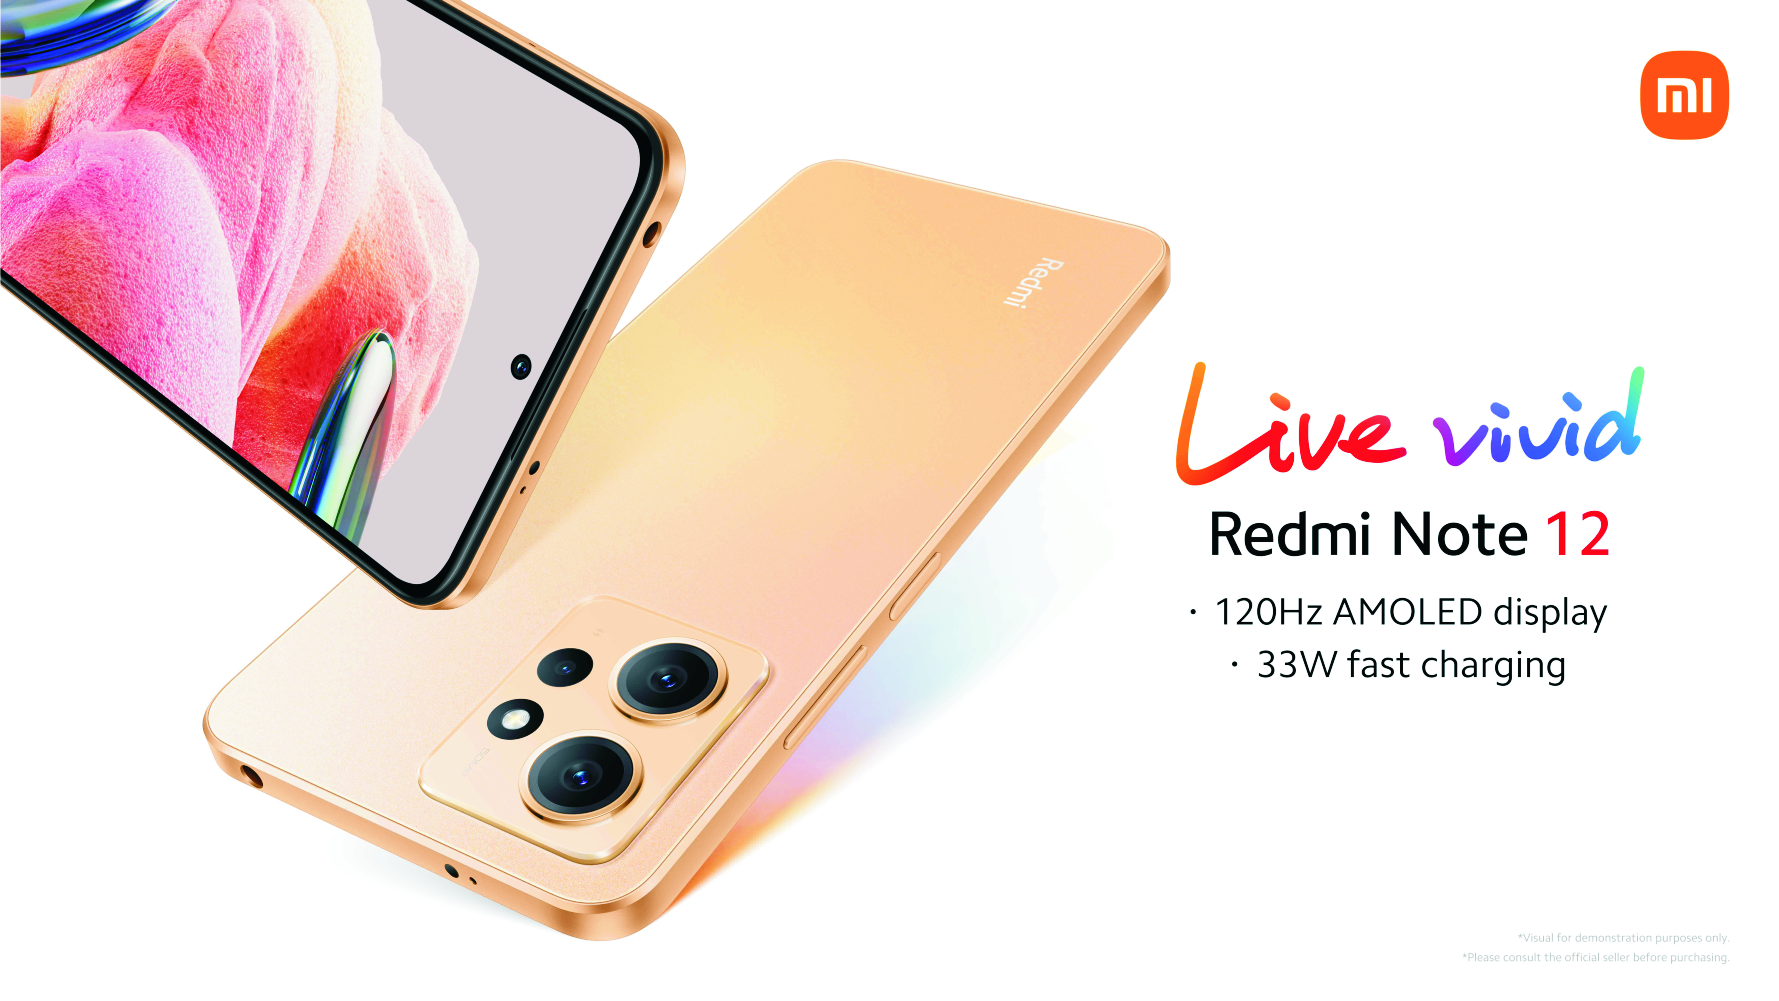 Redmi Note 12 Series Presents Irresistible Offer: Get a Free Neck Bluetooth With Every Purchase, Together With Exciting Price Reductions-marketingspace.com.ng